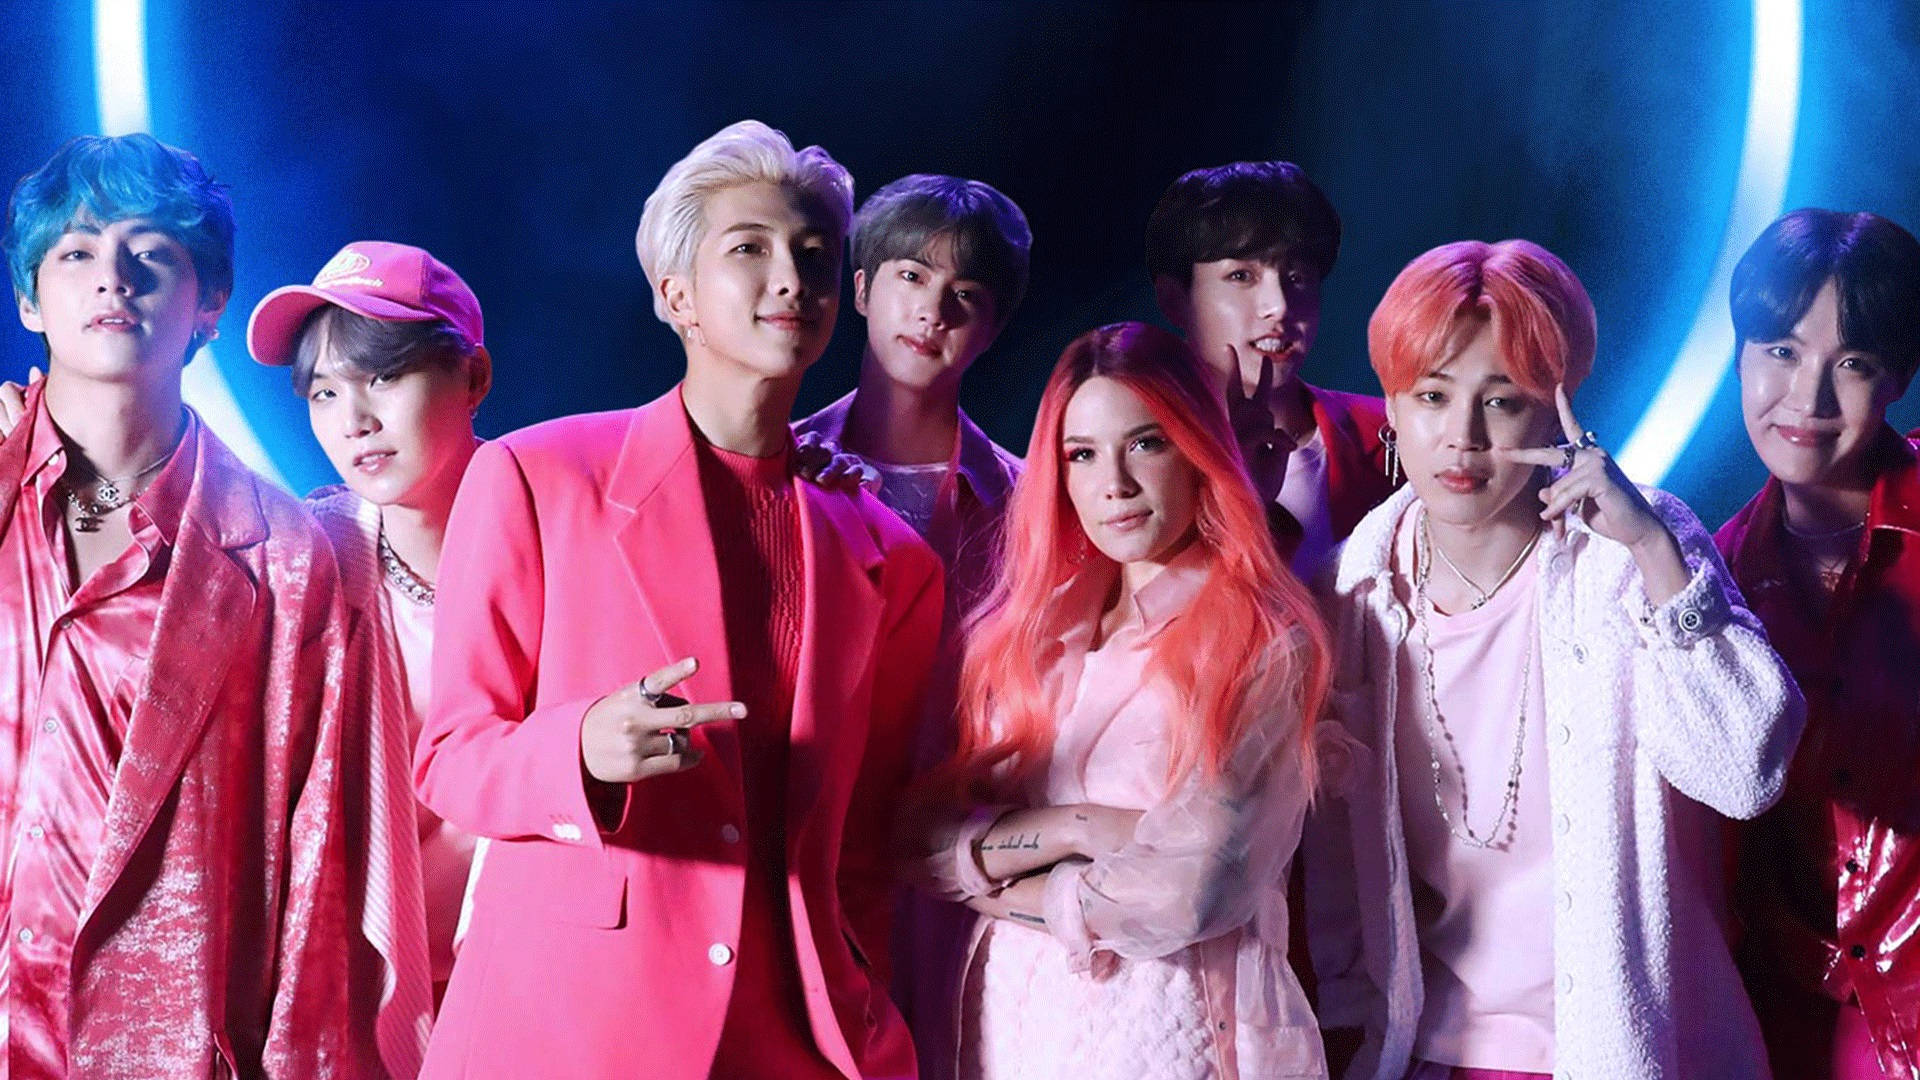 Halsey Boy With Luv Wallpaper